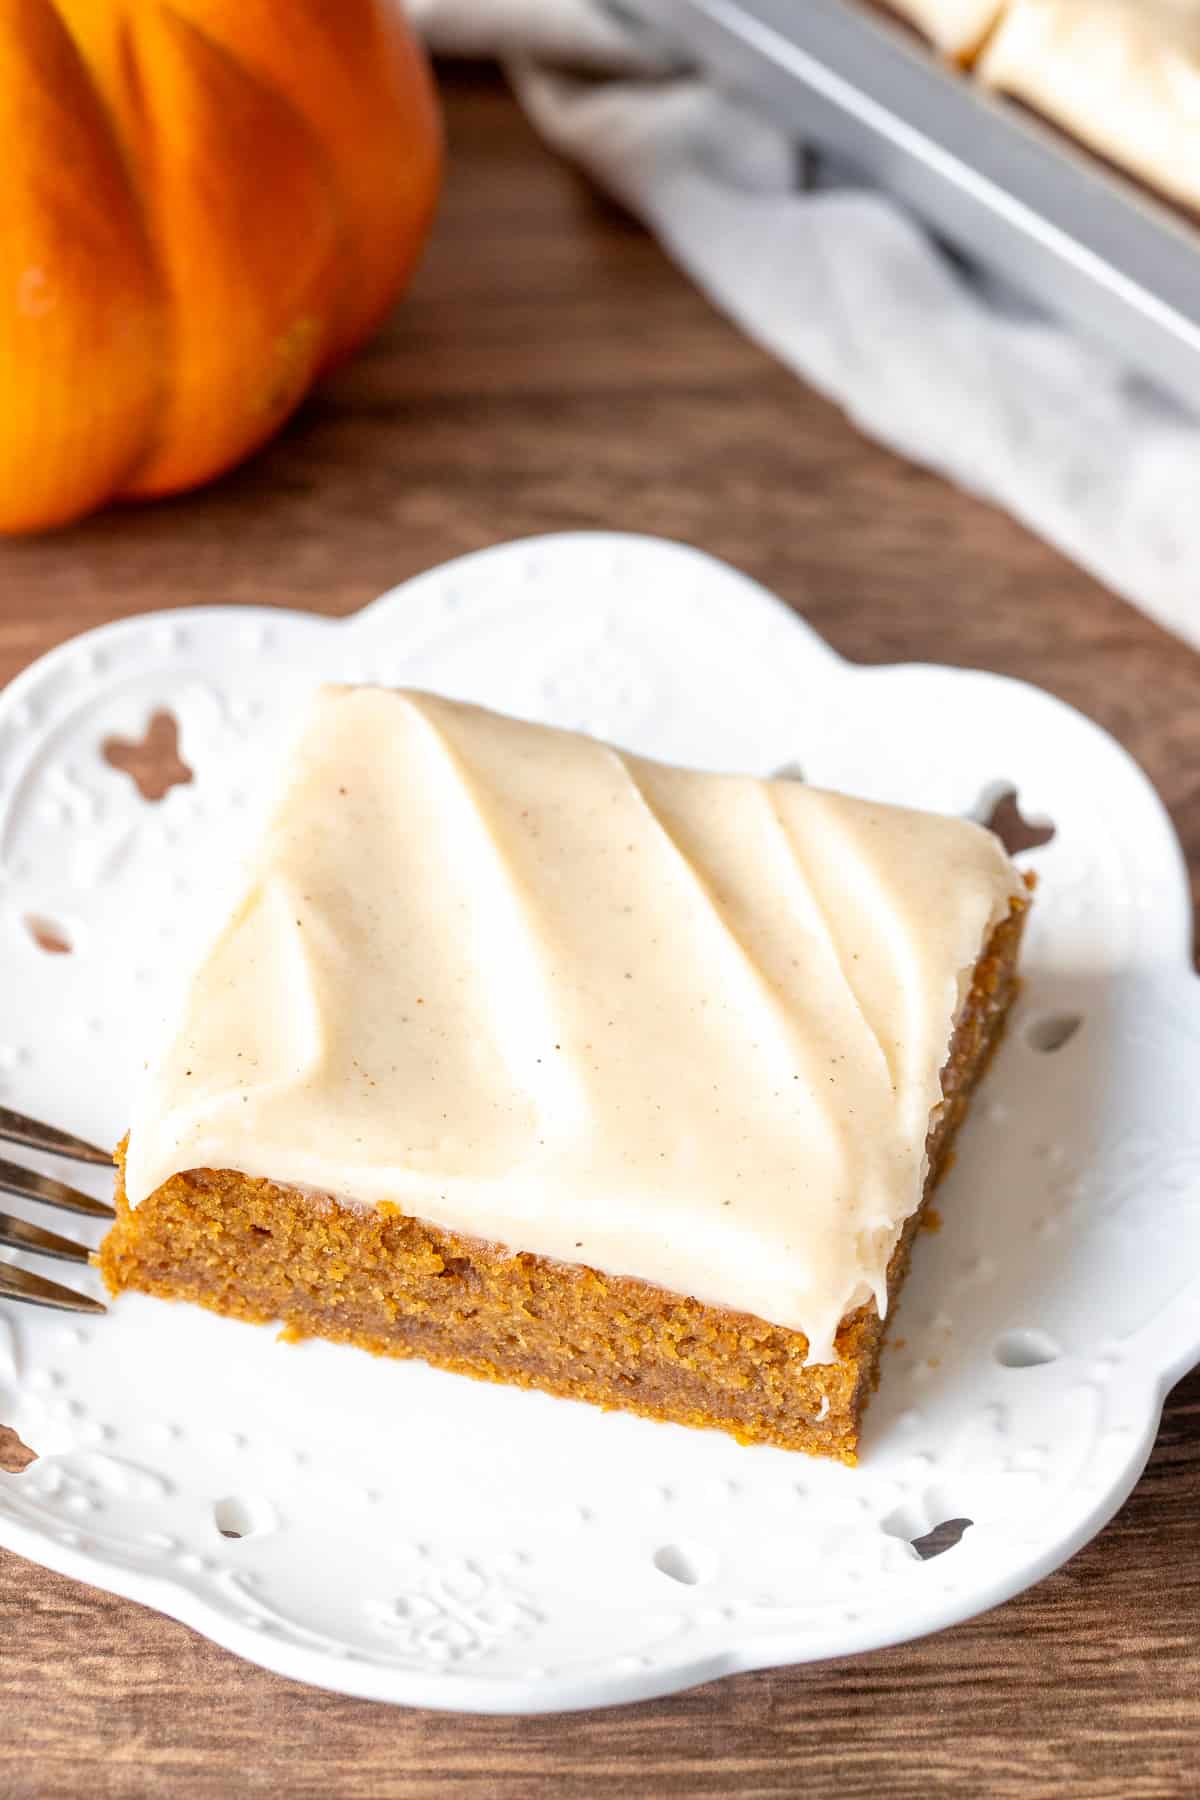 Pumpkin bar with cinnamon cream cheese frosting on a plate